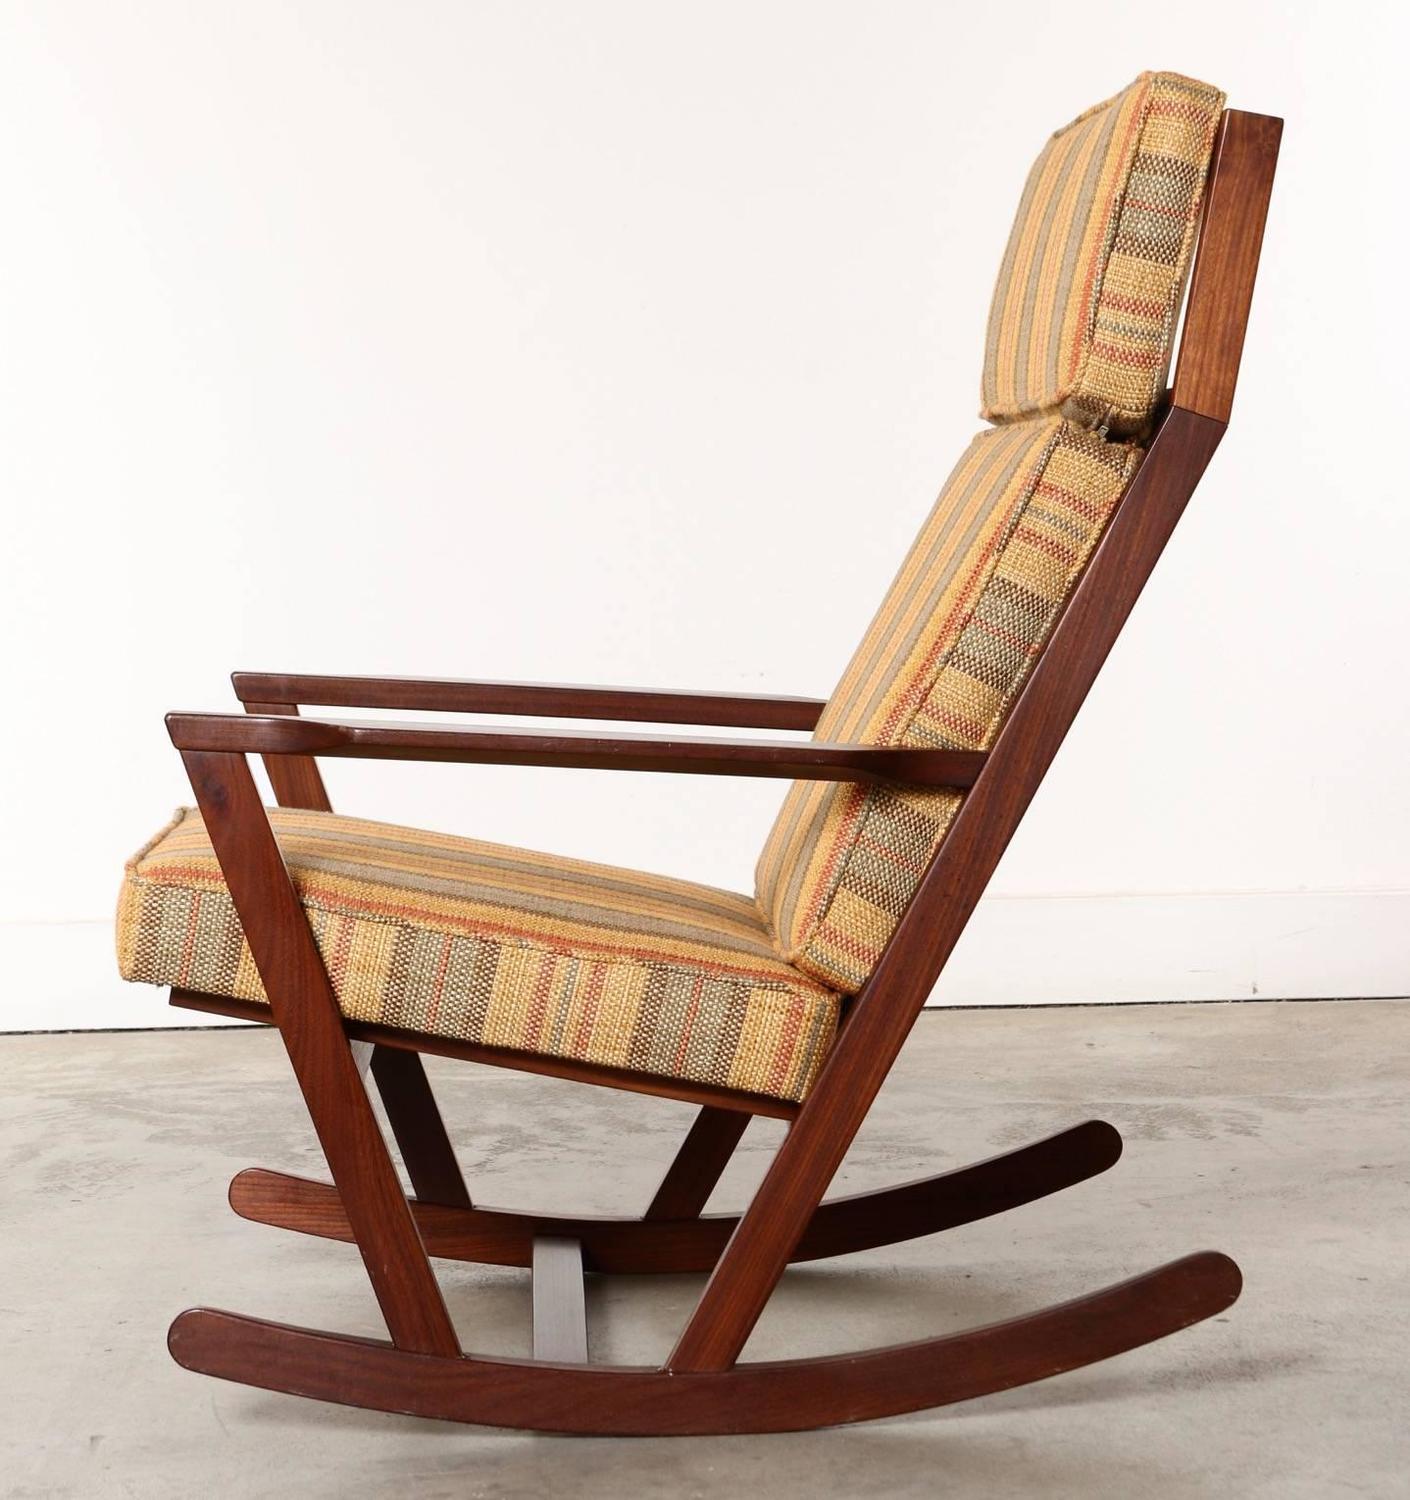 Danish Modern Wooden Rocking Chair with Cushions Designed ...